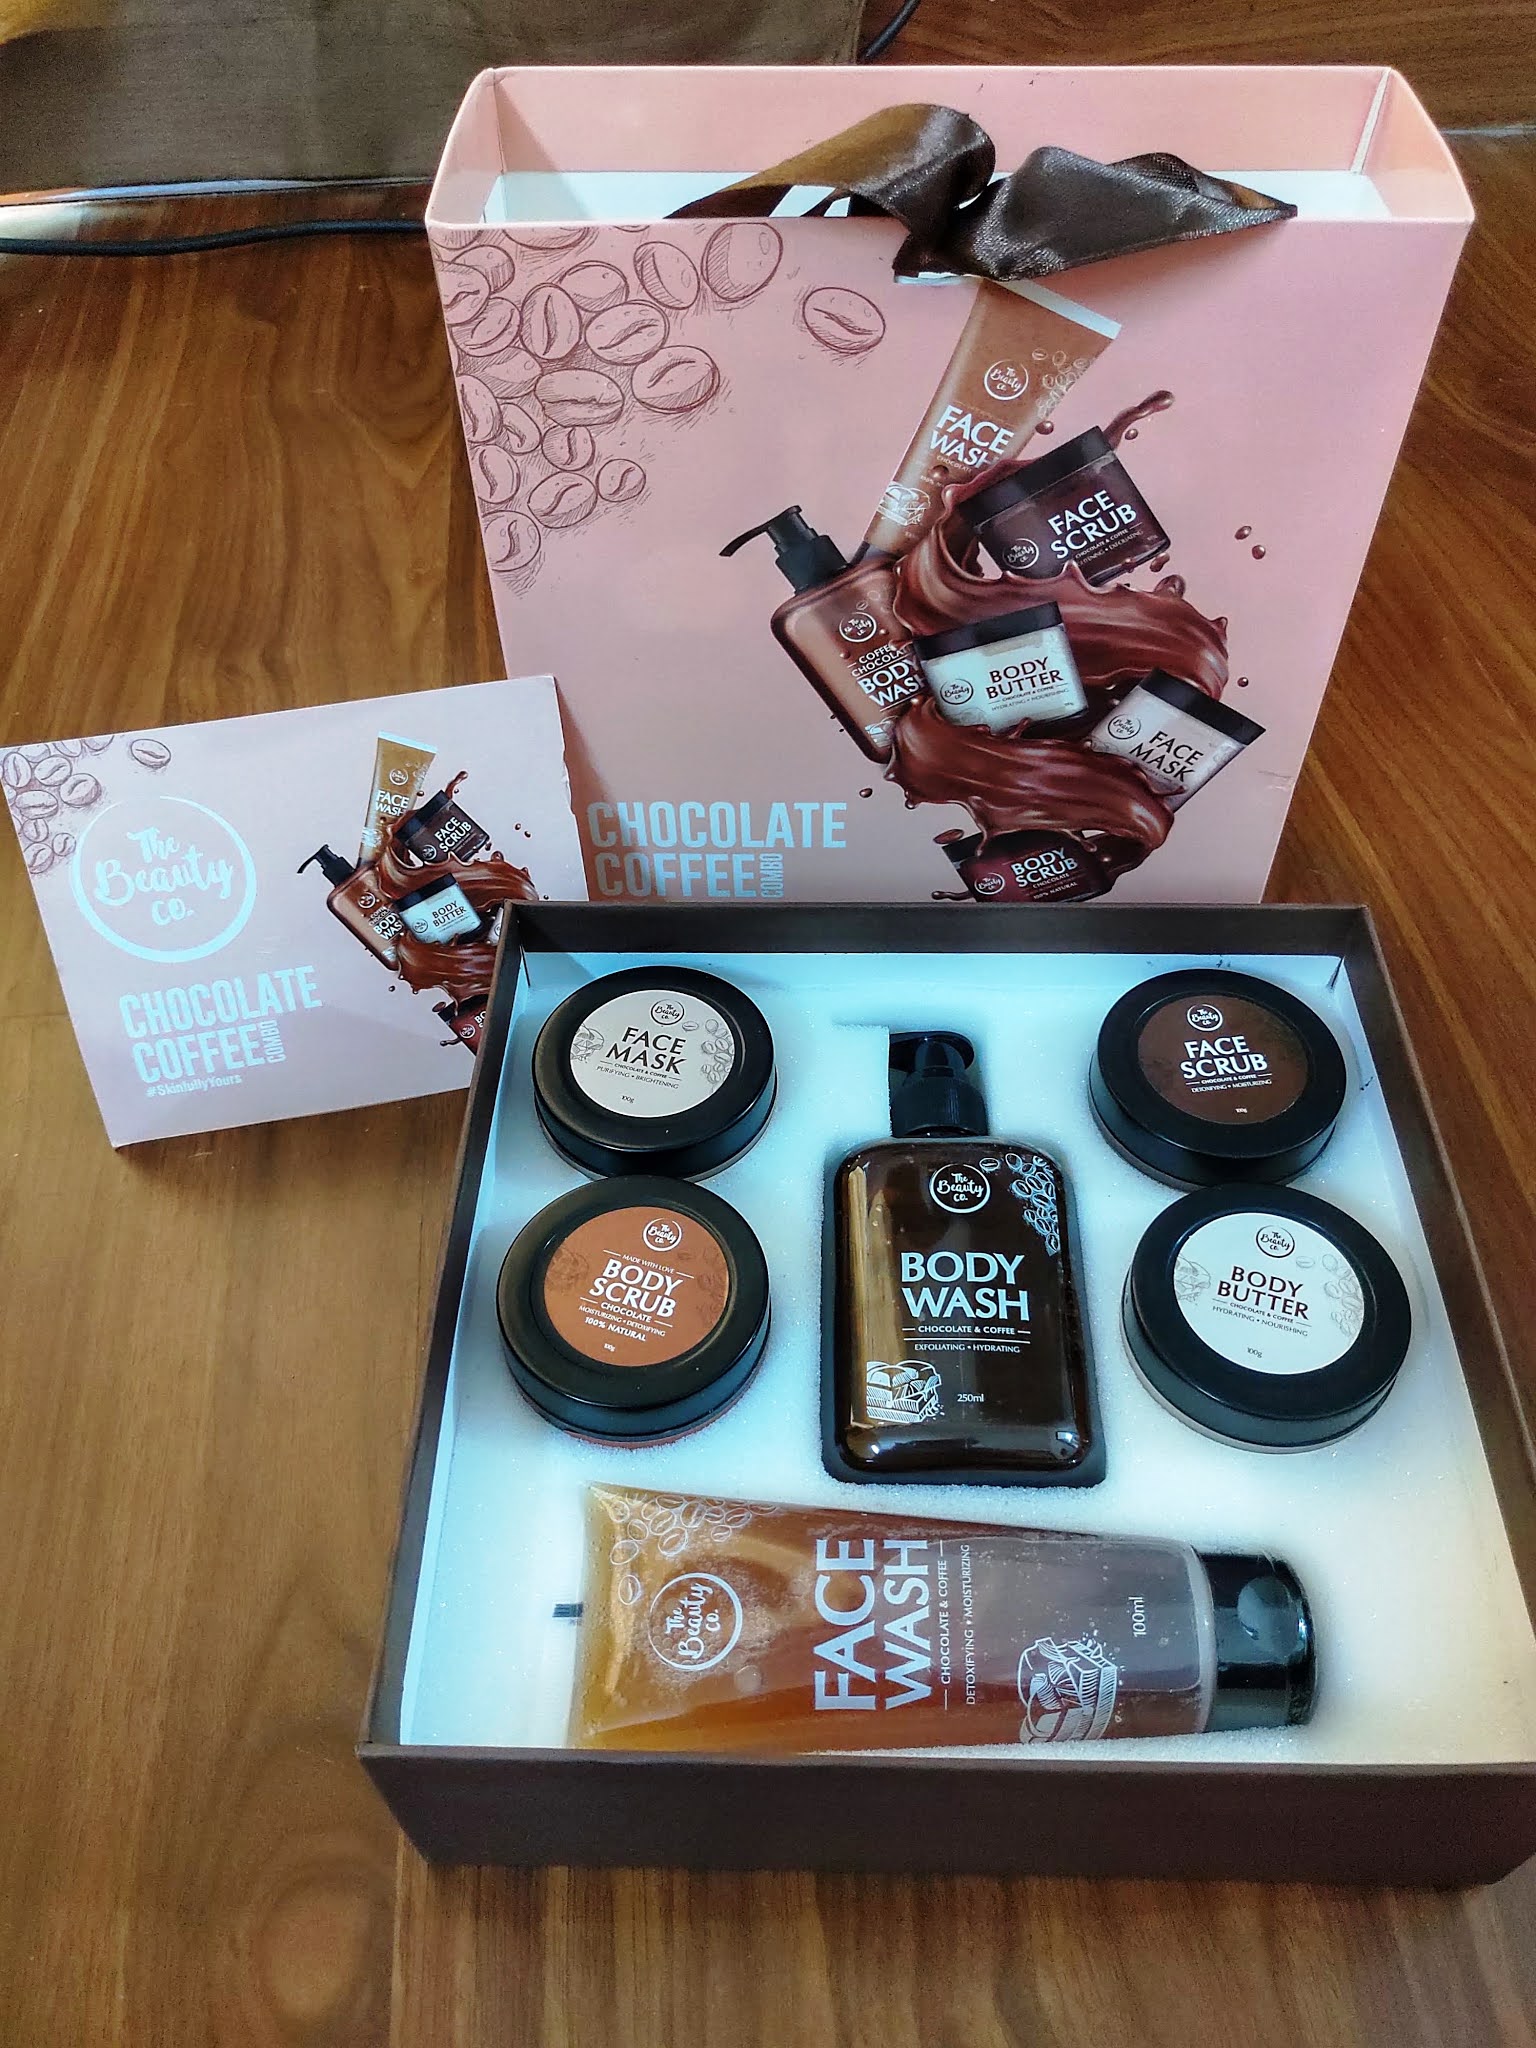 Chocolate Coffee body products from The Beauty Co